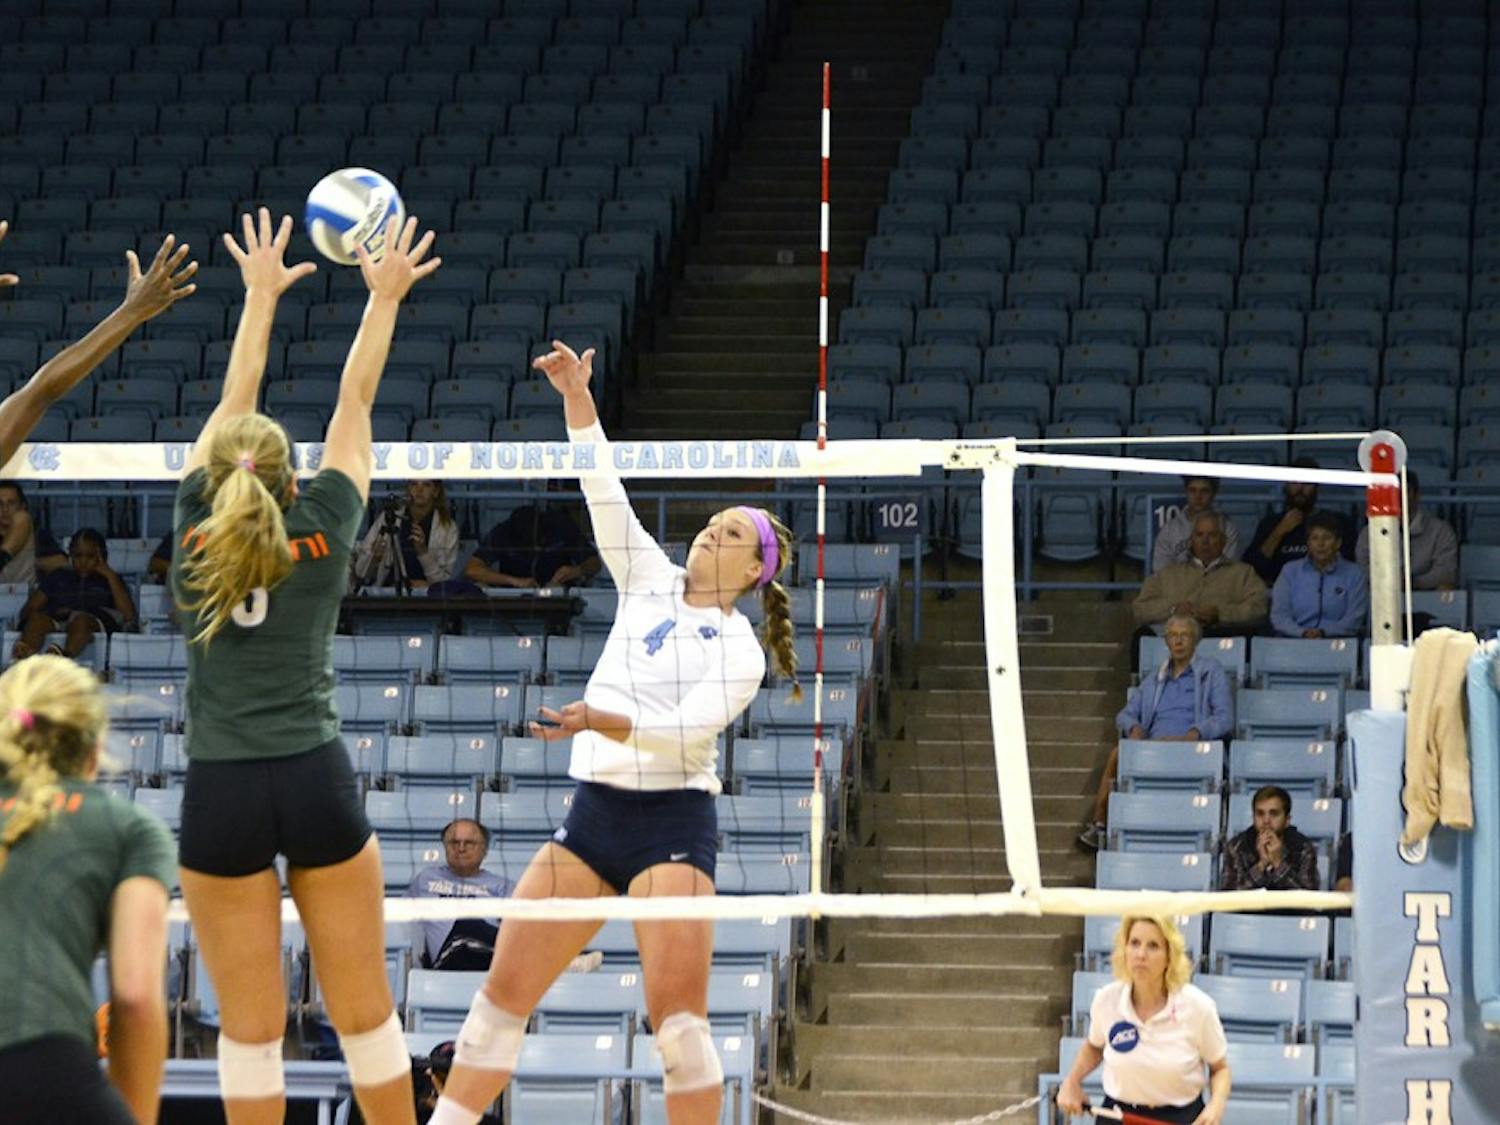 Leigh Andrew, a junior outside hitter, spikes a ball against Miami on Friday. UNC won 3-0 against the Miami Hurricanes.